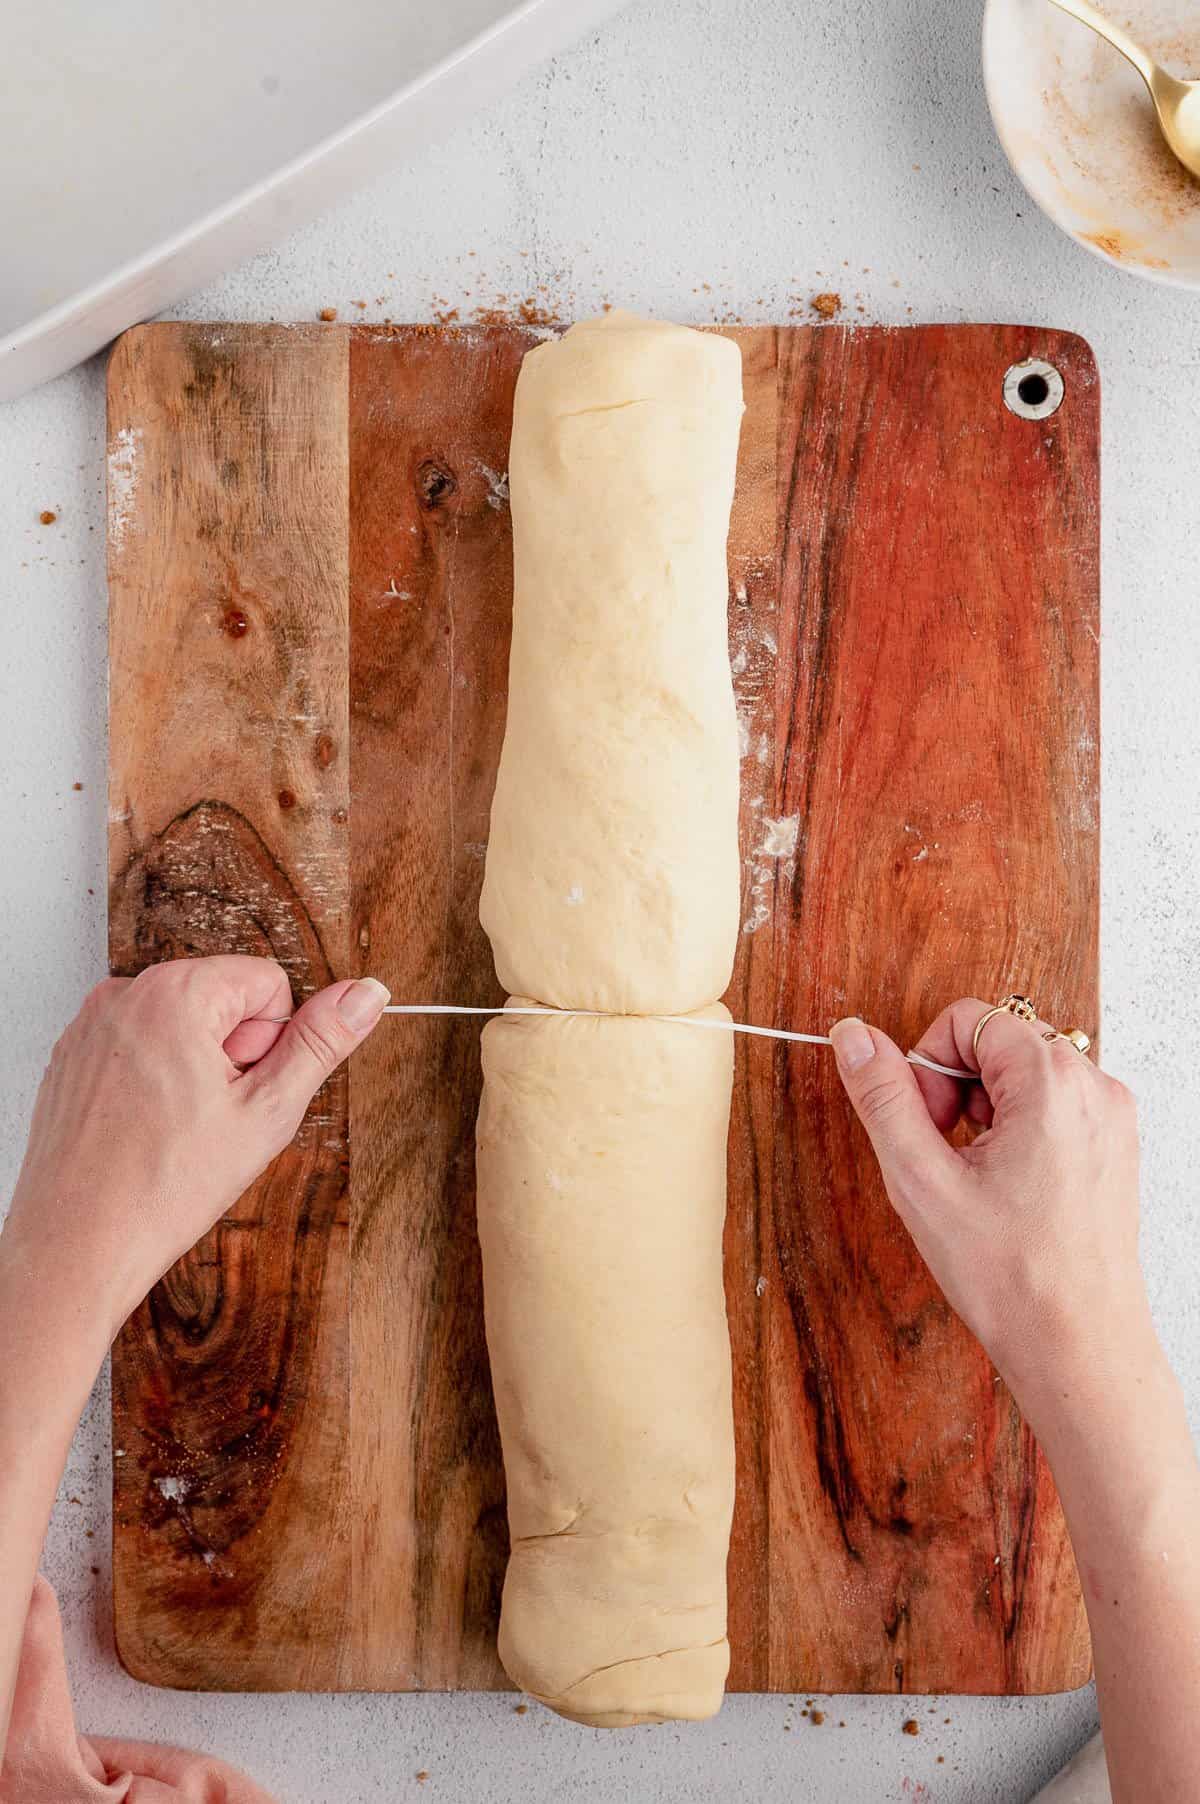 A hand uses floss to cut a log of dough into rolls on a wooden cutting board.